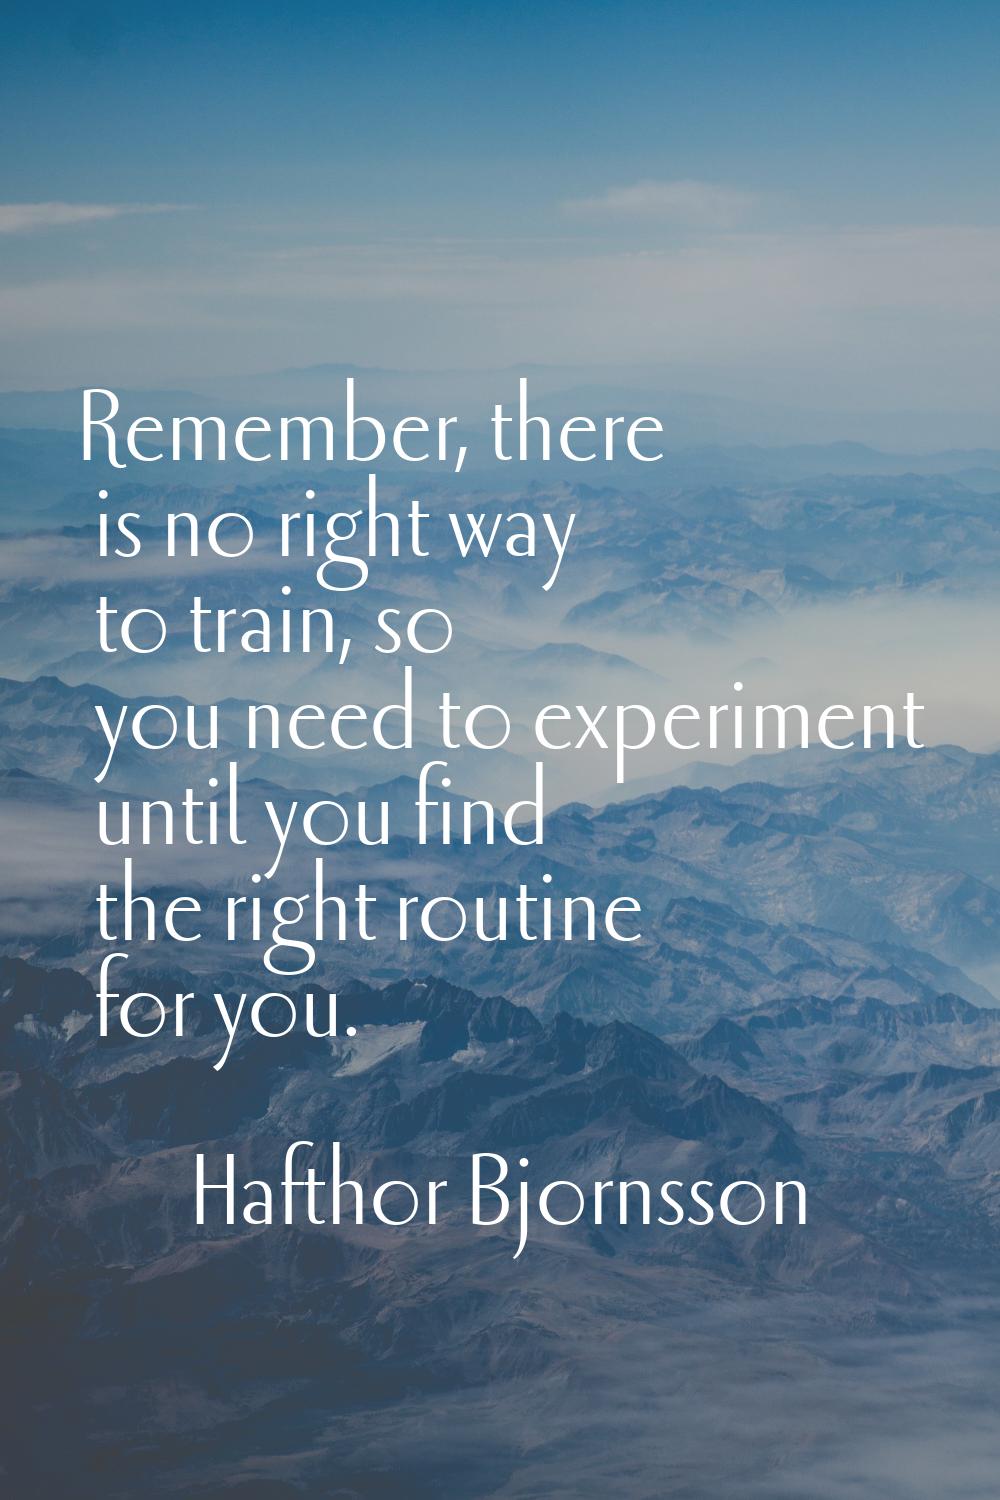 Remember, there is no right way to train, so you need to experiment until you find the right routin